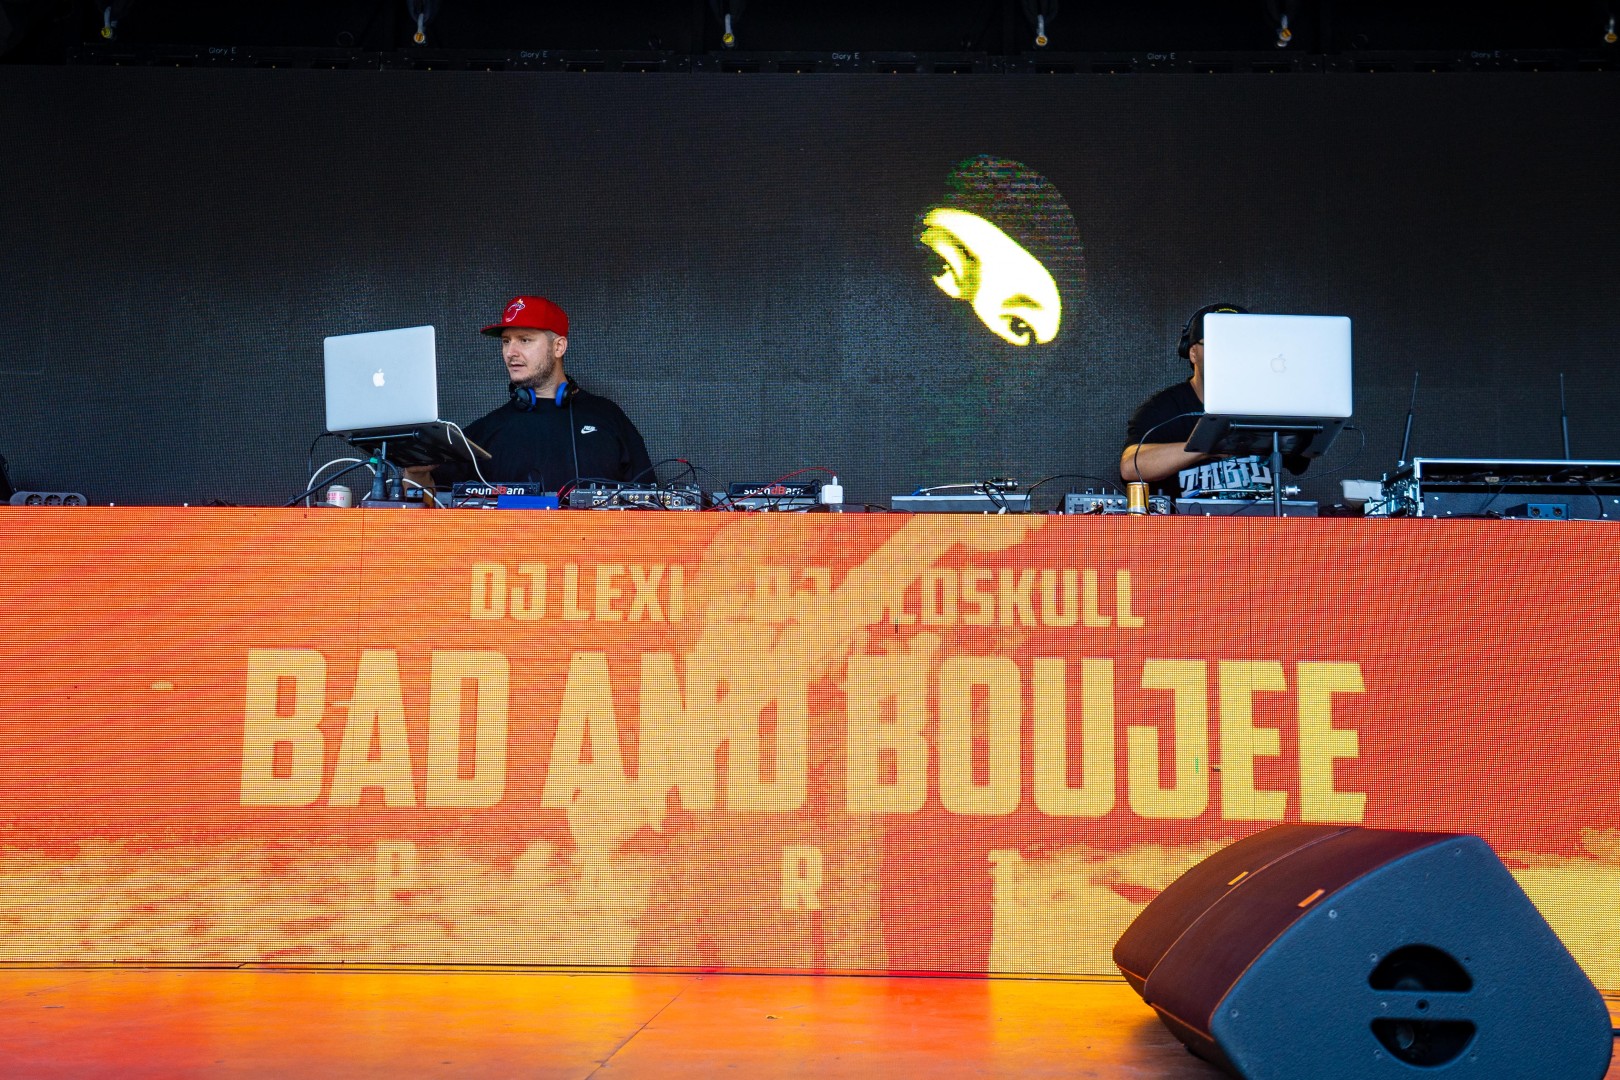 Bad & Boujee at Bulevardul Kiseleff in Bucharest on September 18, 2022 (d2a31467f4)